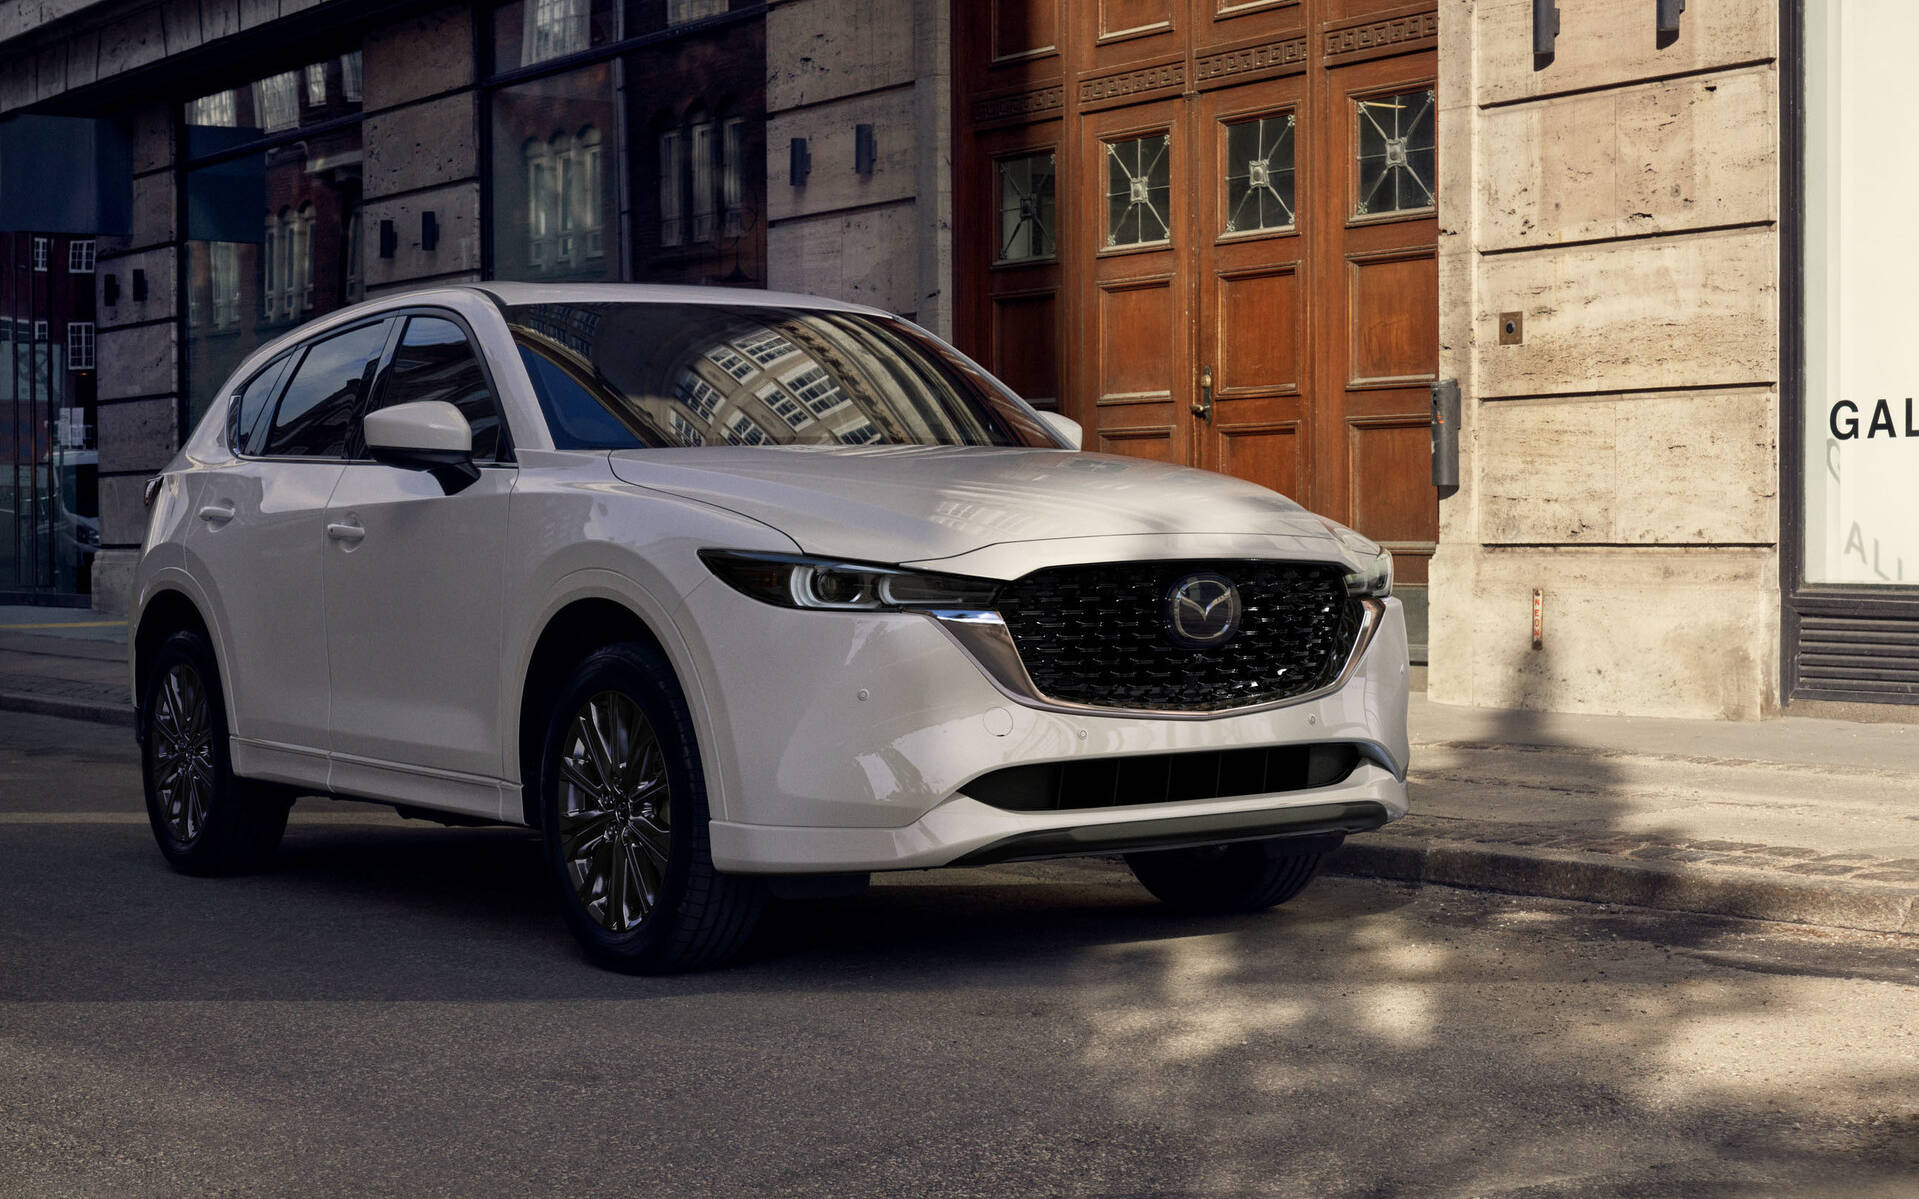 Does the Mazda CX-5 have All-Wheel-Drive?